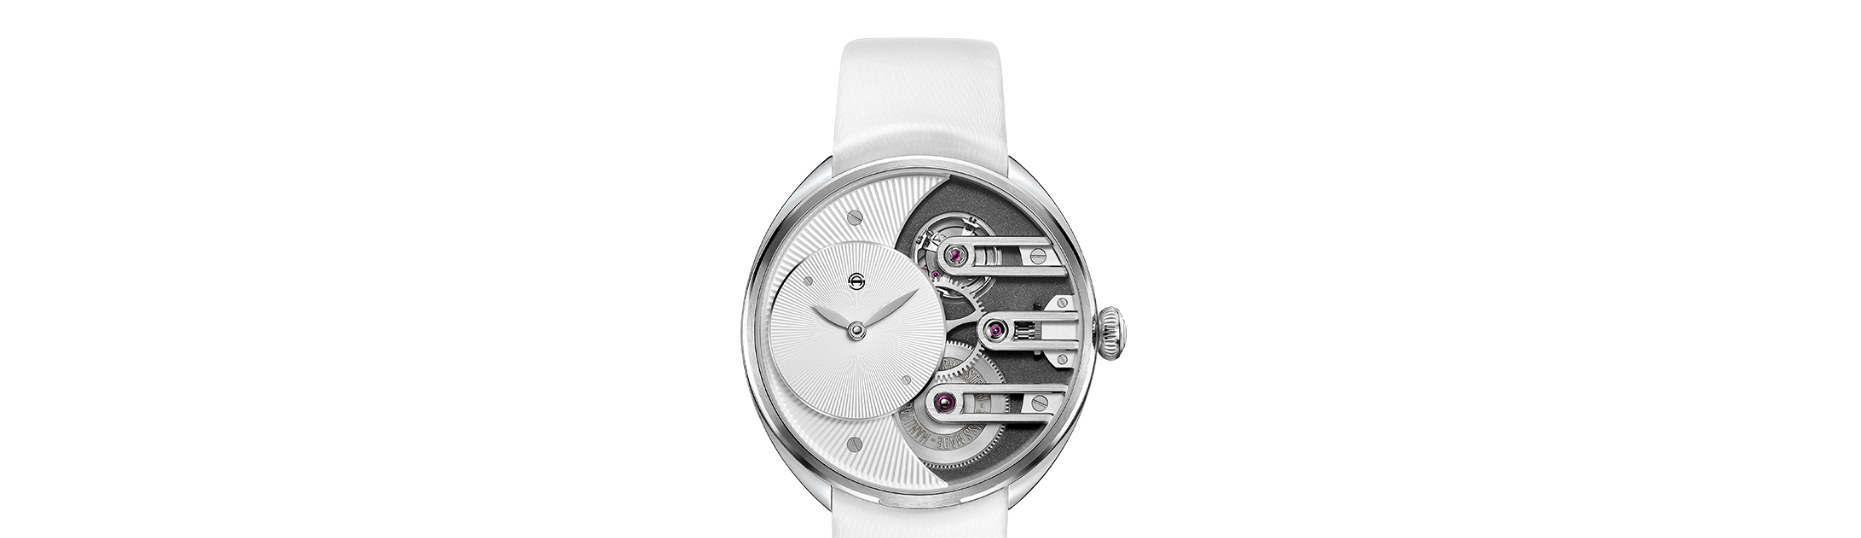 Armin Strom Introduces Their First Technical Watch for Ladies